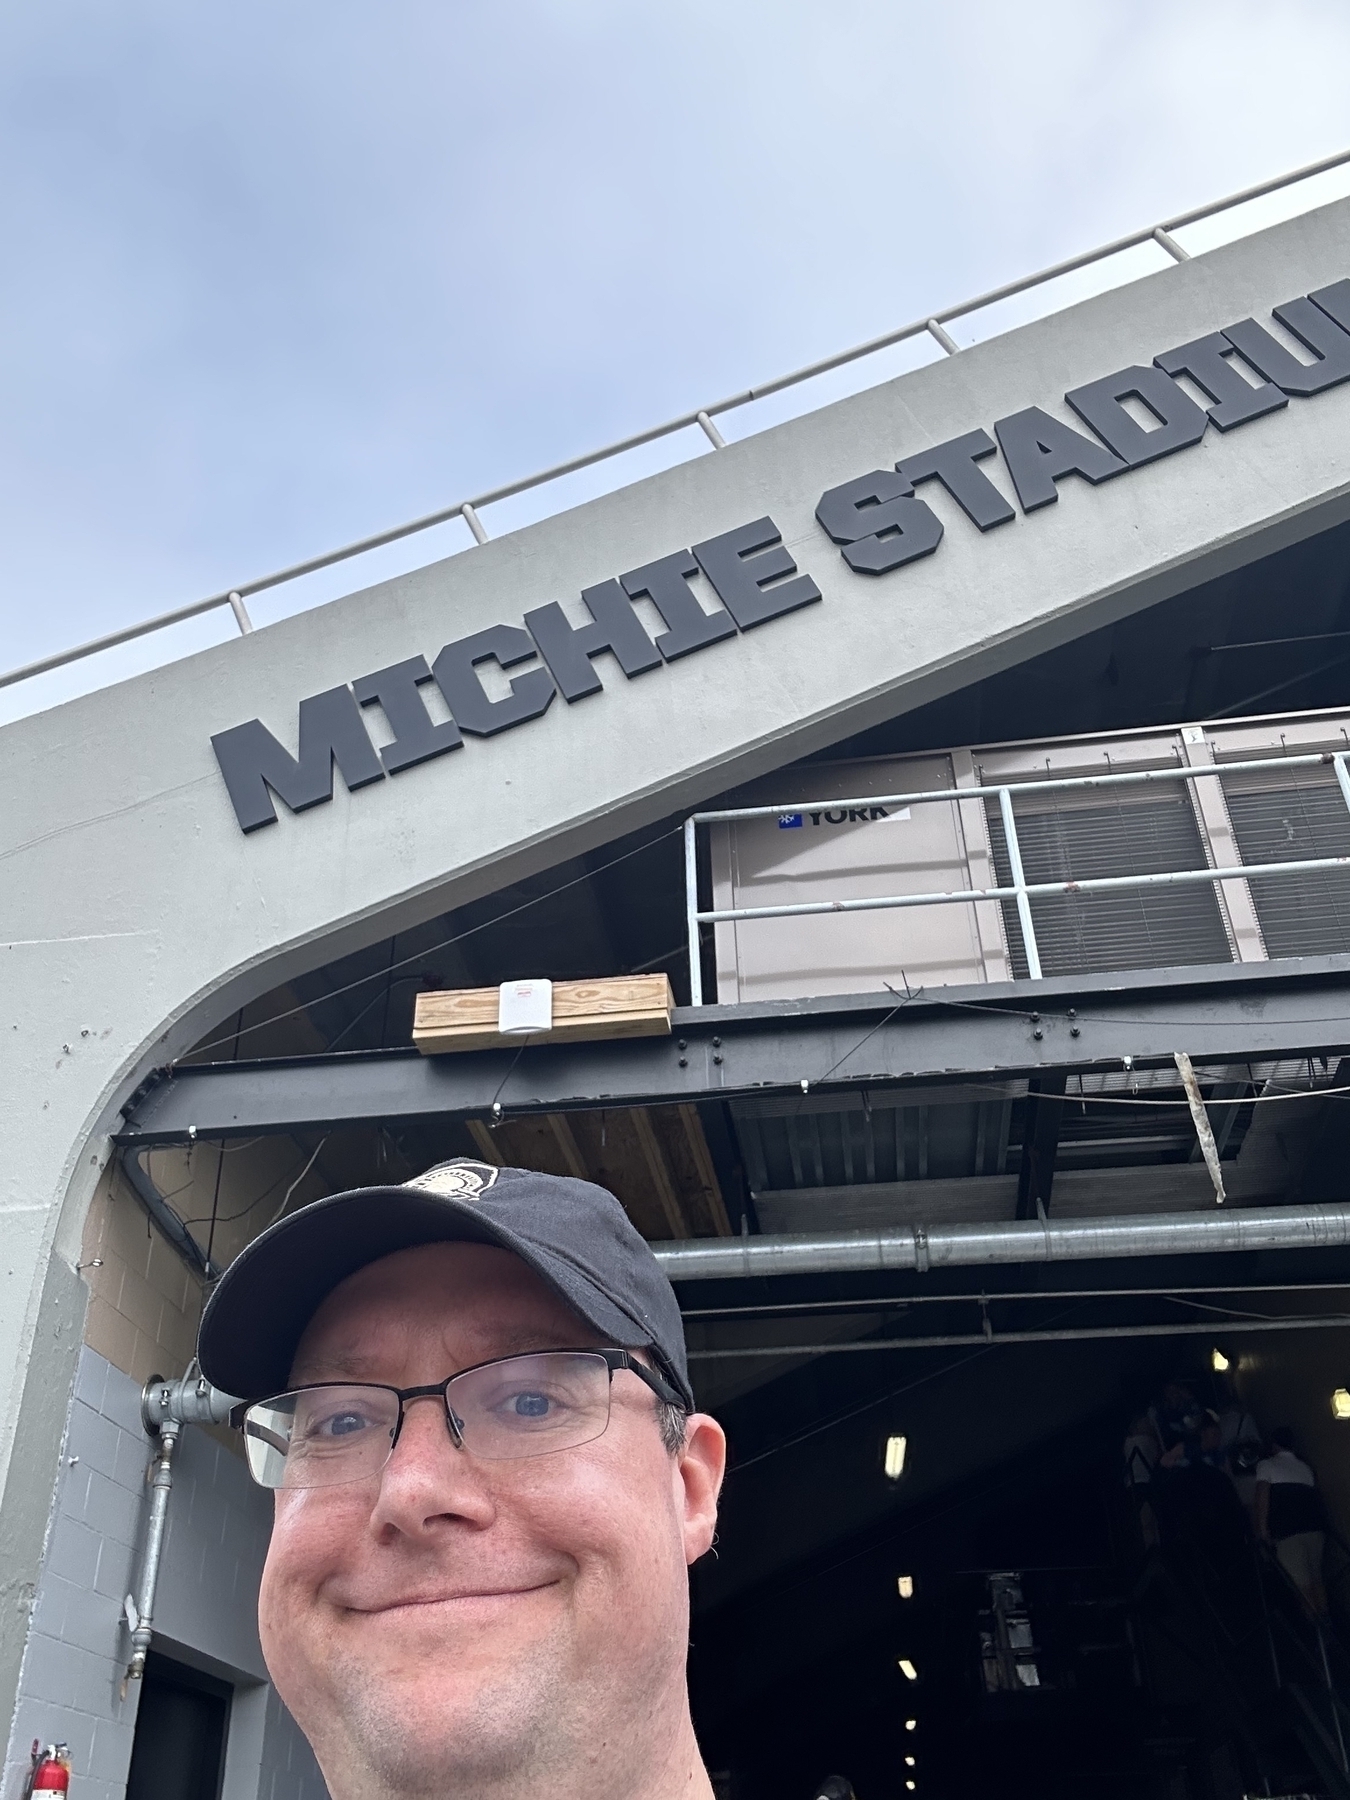 Selfie of the author at Army’s Michie Stadium in West Point, NY